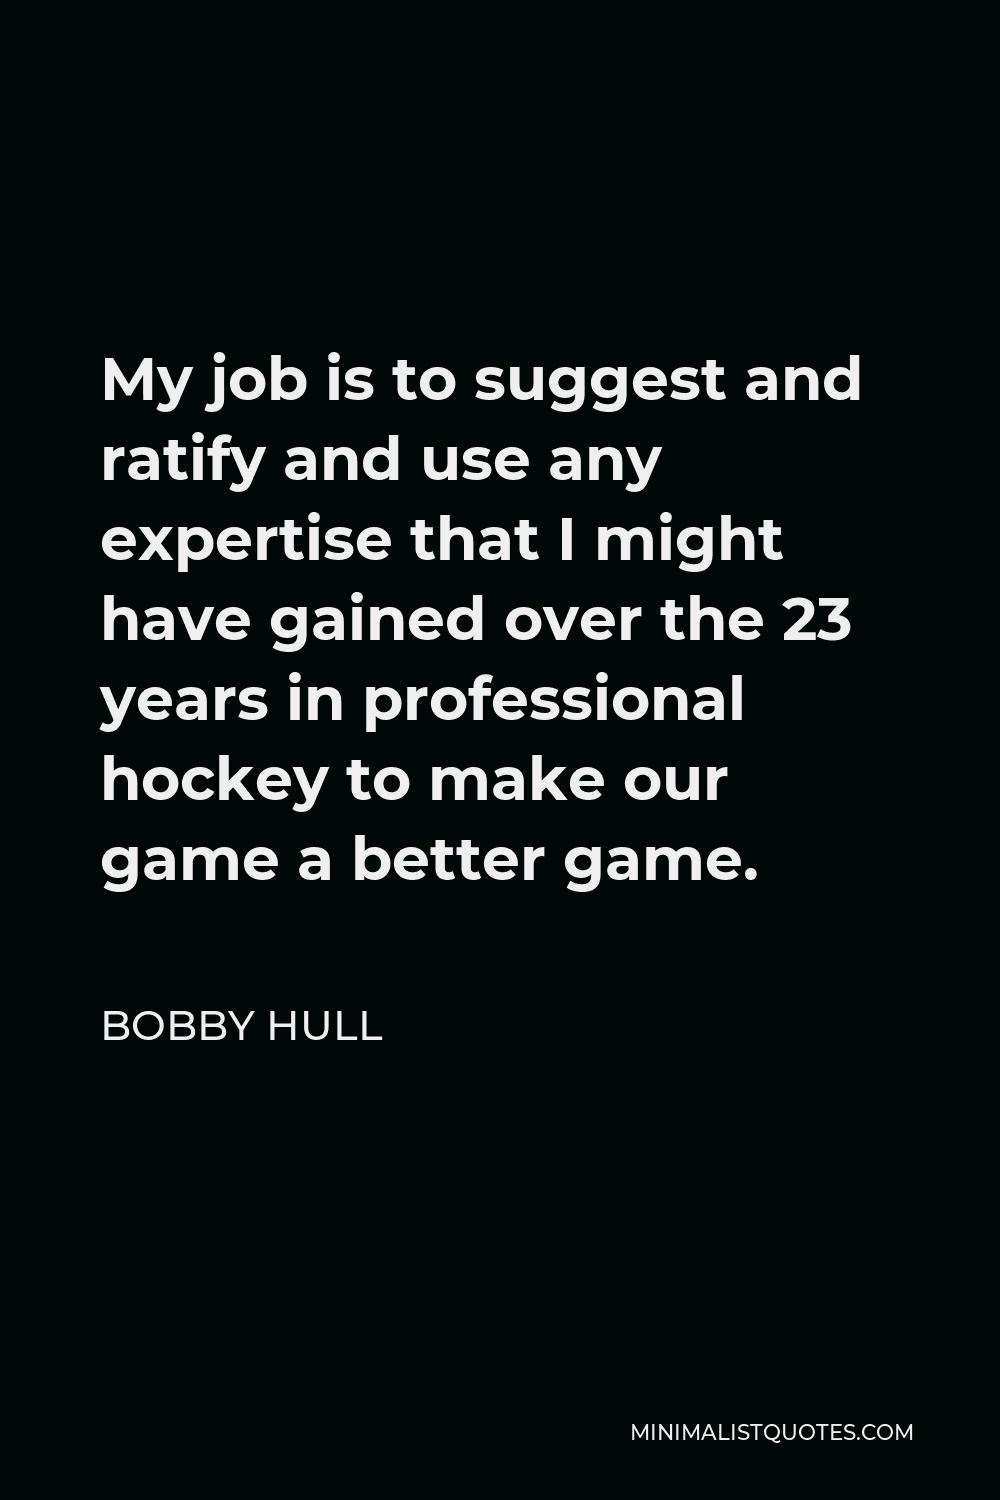 Bobby Hull Quote - My job is to suggest and ratify and use any expertise that I might have gained over the 23 years in professional hockey to make our game a better game.